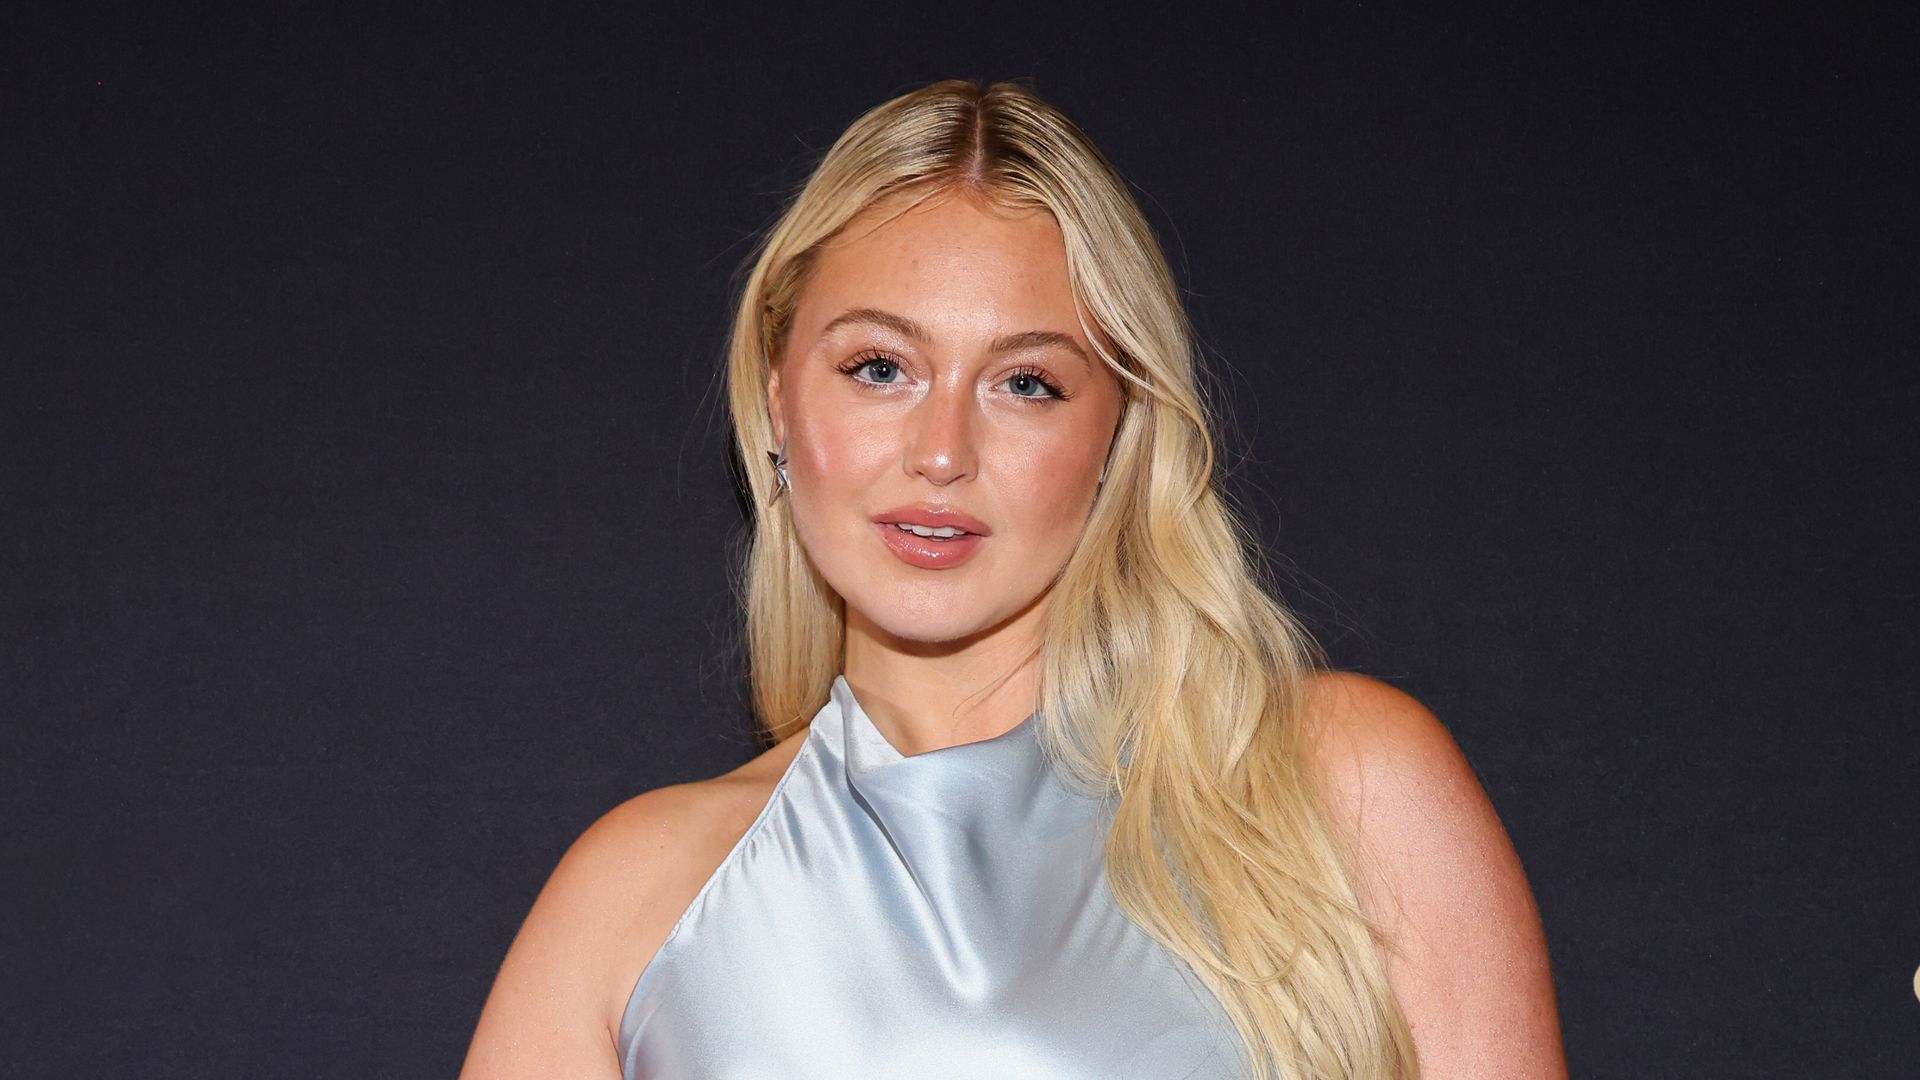 Iskra Lawrence attends the 2023 LA Style Awards at The GRAMMY Museum on June 22, 2023 in Los Angeles, California